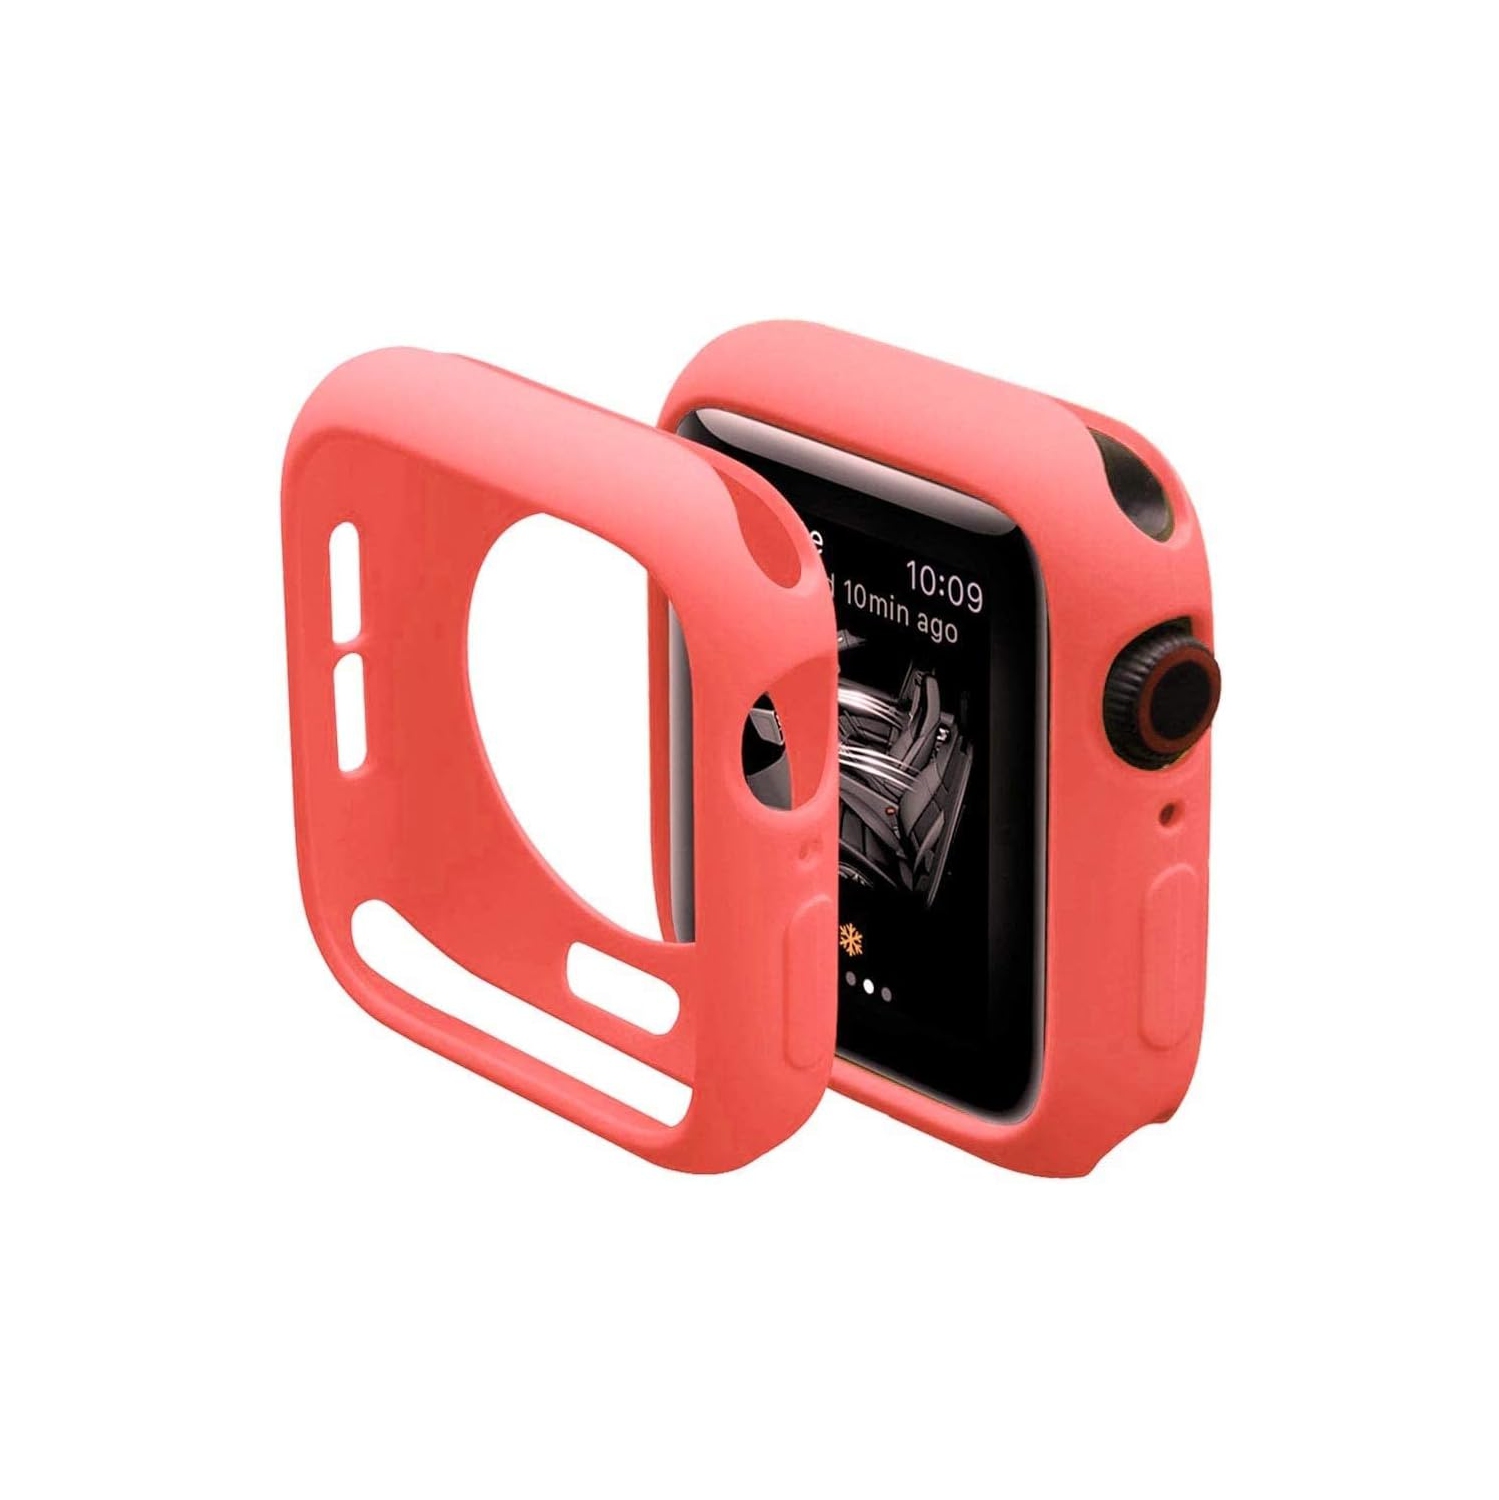 Ultra Thin Soft TPU Shockproof Bumper Protector for Apple Watch Case iWatch Series 3/2/1, Warm Pink 42mm